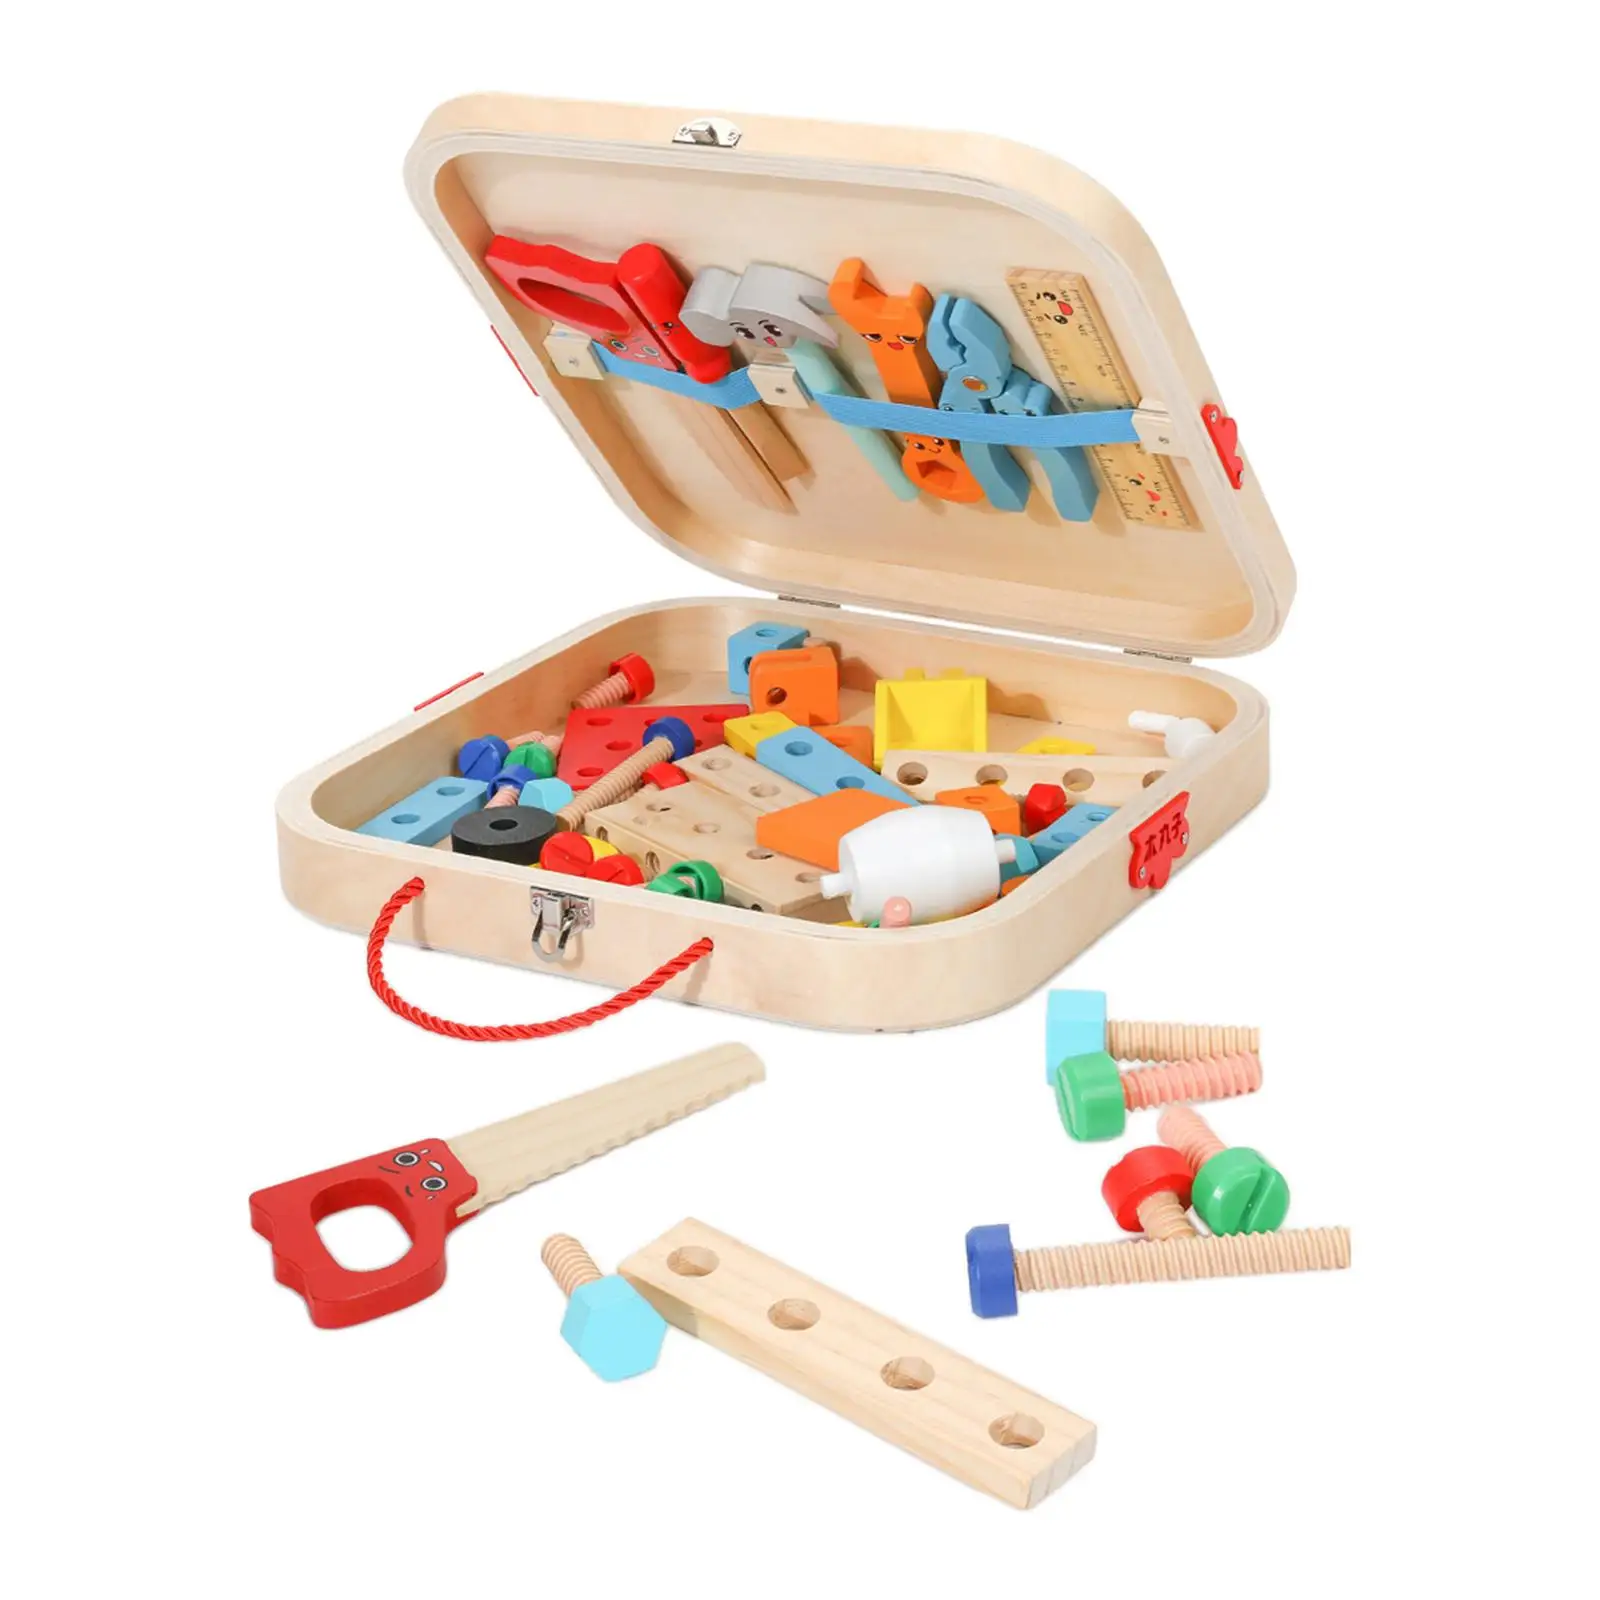 Wooden Kid Tool Set for Toddlers Develops Fine Motor Skills Wooden Tool Box for Bedroom Diy Kid 2 3 4 5 6 Year Old Boys Girls